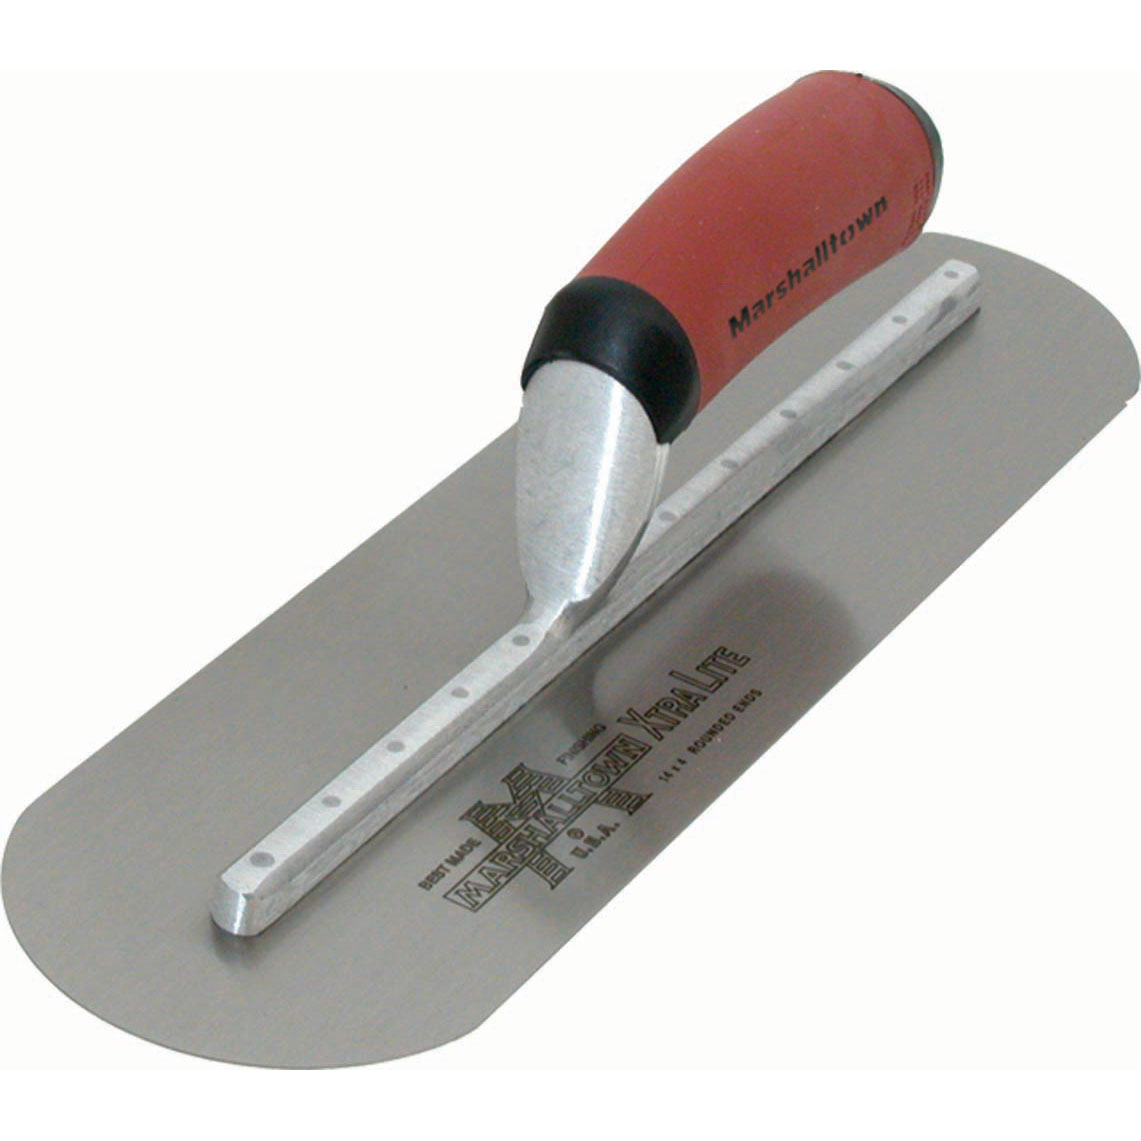 Marshalltown MXS66FRD 16in X 4in Round End Finishing Trowel with Curved DuraSoft? Handle MAT-MXS66FRD